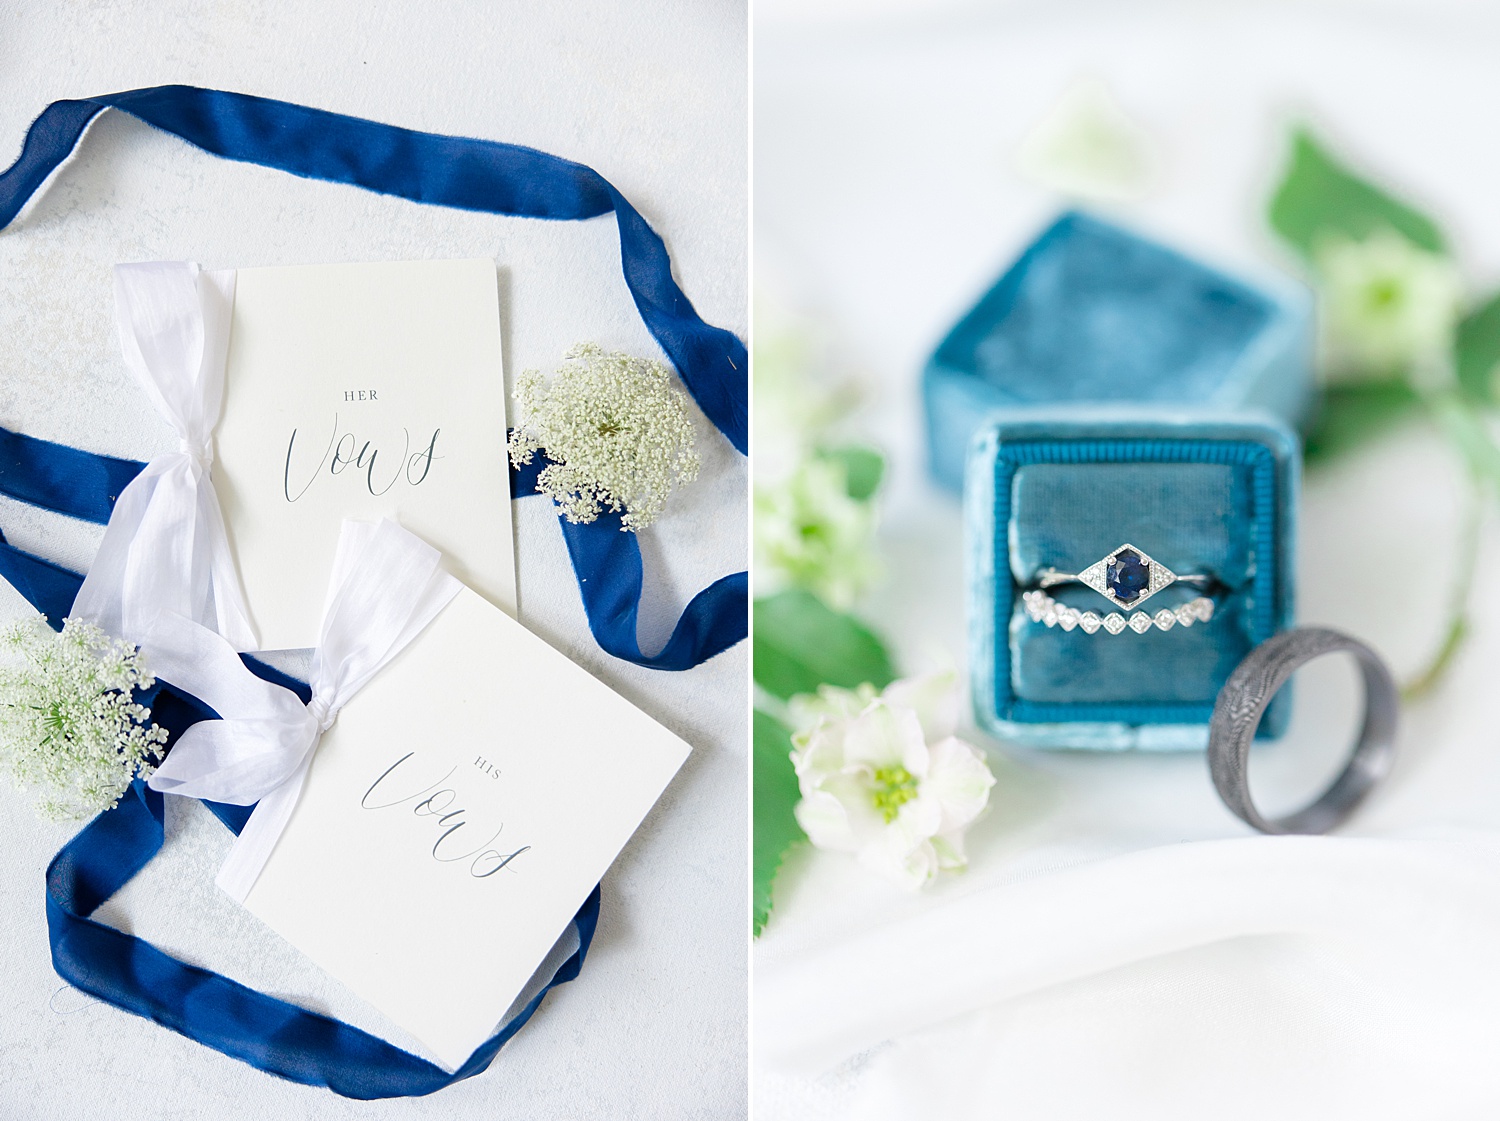 vows and wedding ring in ring box